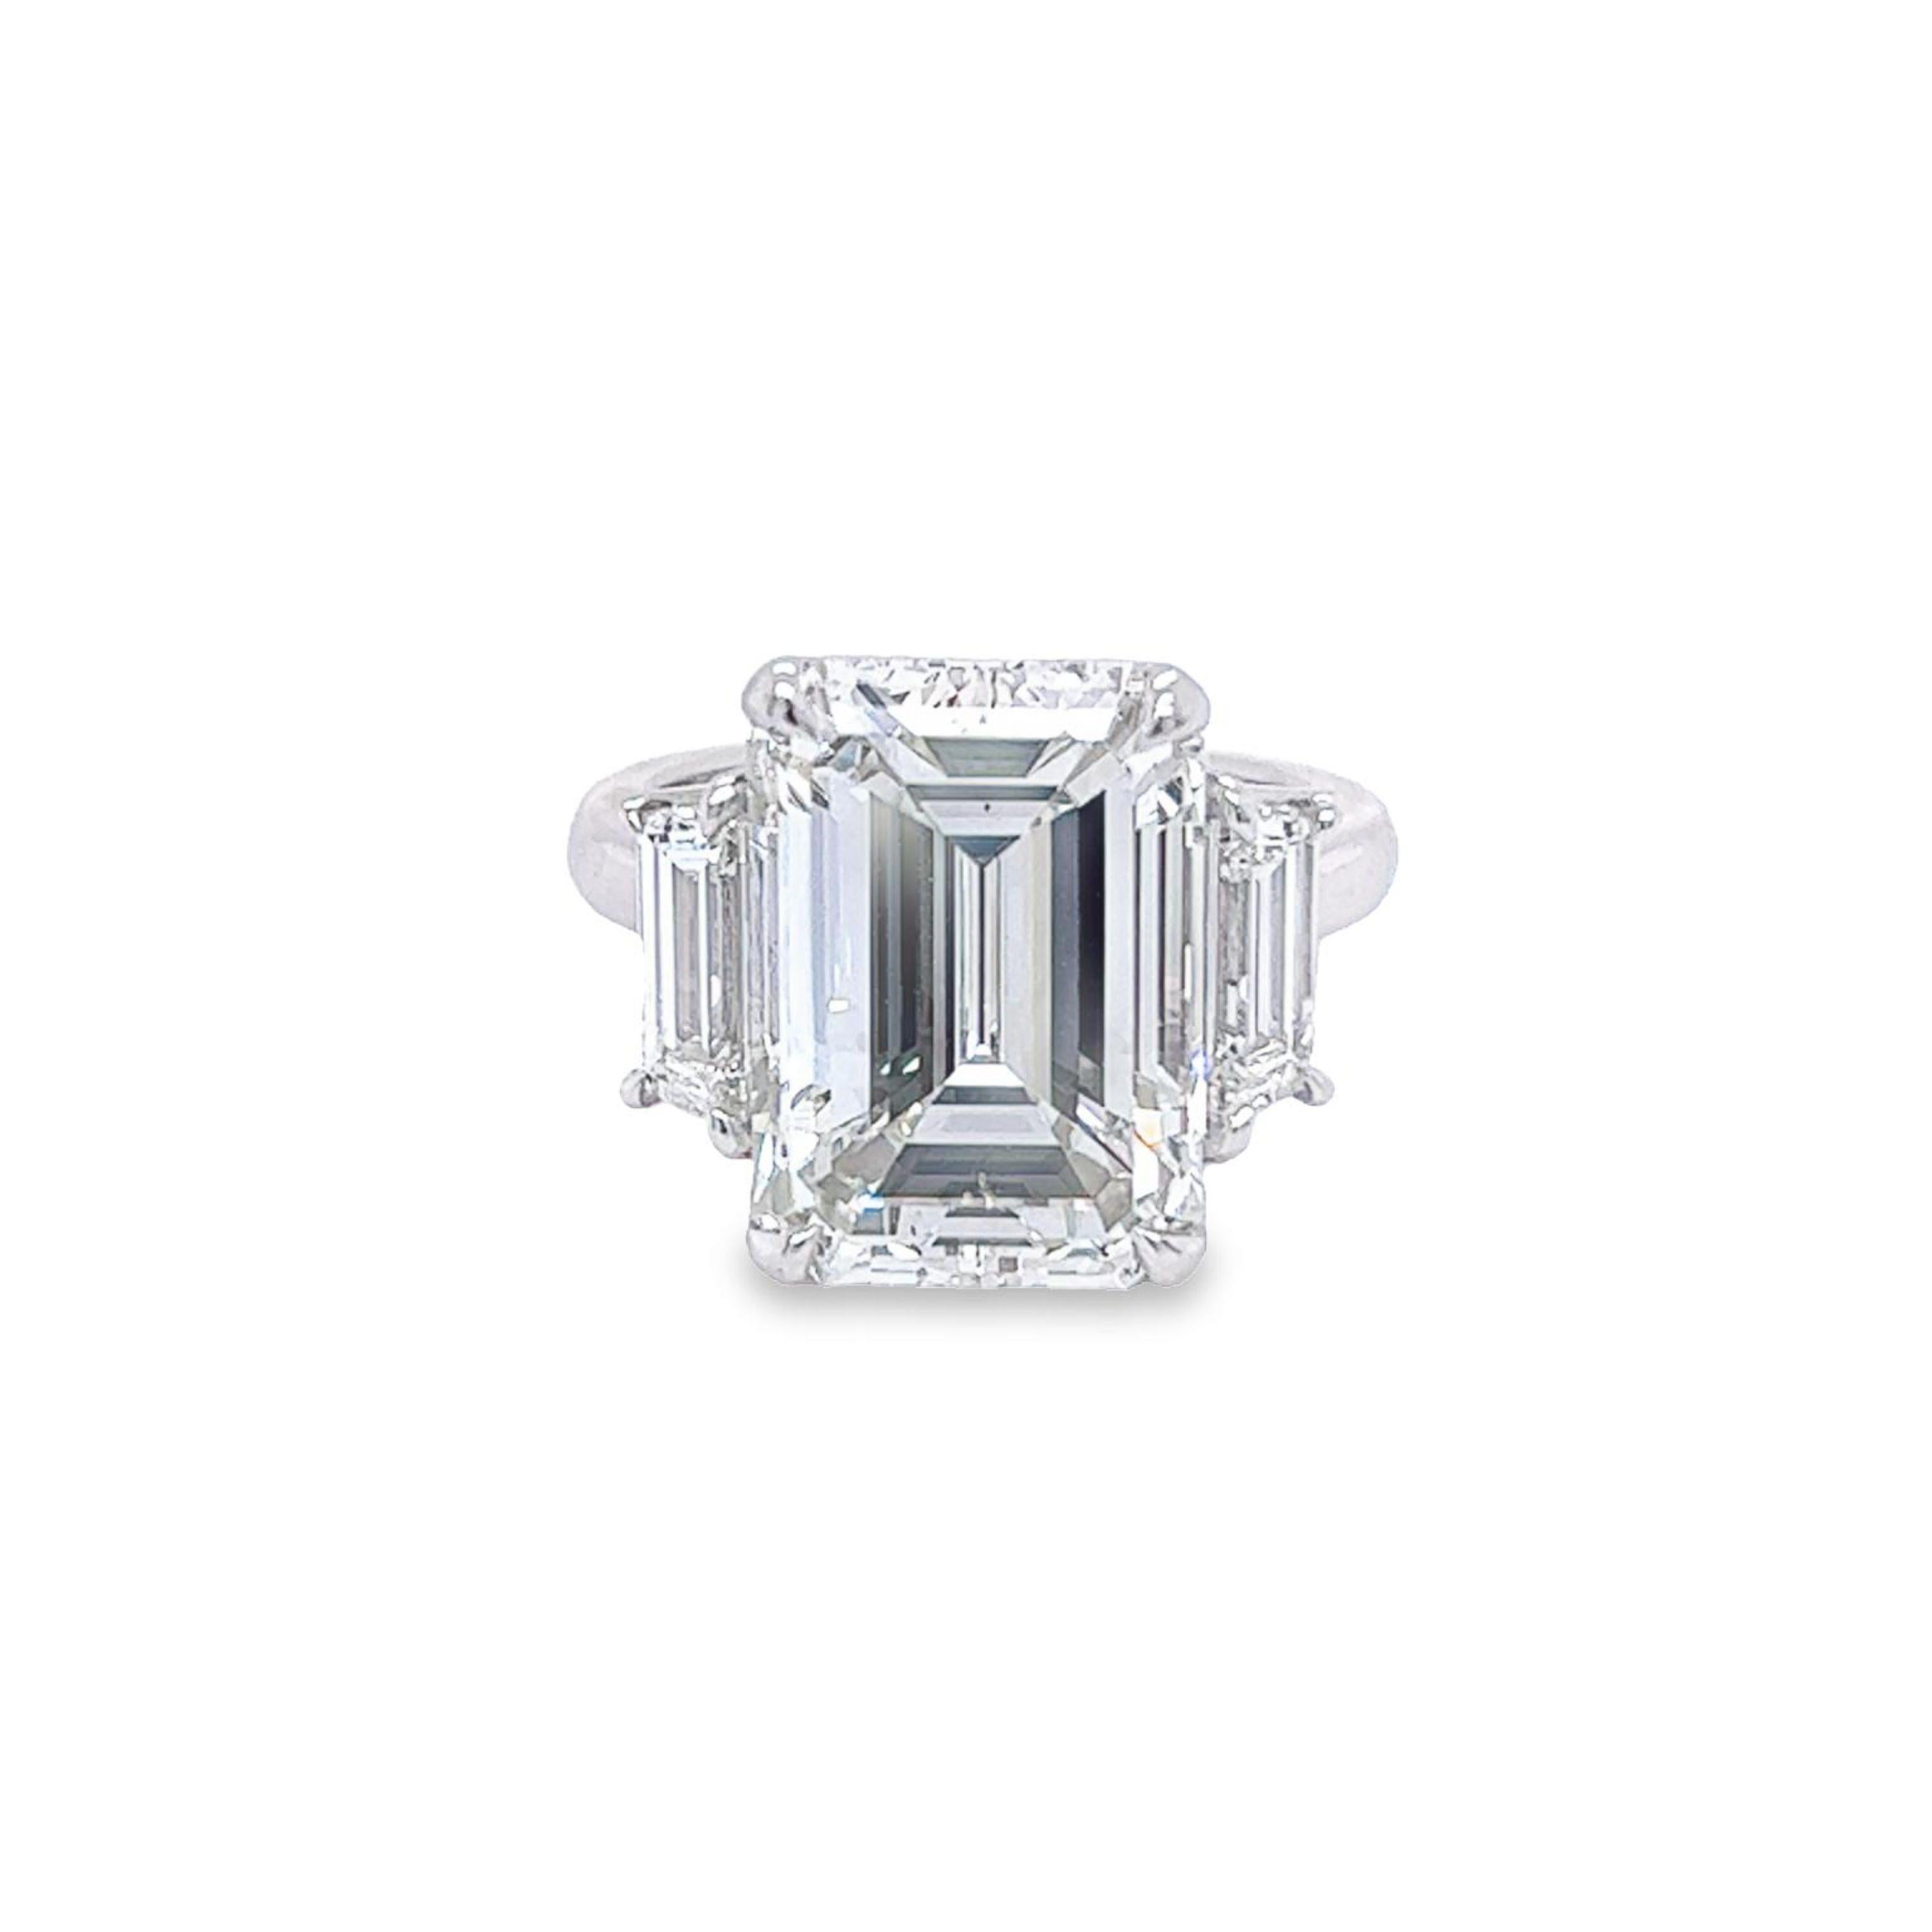 Rosenberg Diamonds & Co. 10.07 carat Emerald cut J color SI1 clarity is accompanied by a GIA certificate. This exceptional SI1 is set in a handmade platinum setting with perfectly matched pair of step cut side stones flanking on both sides with a